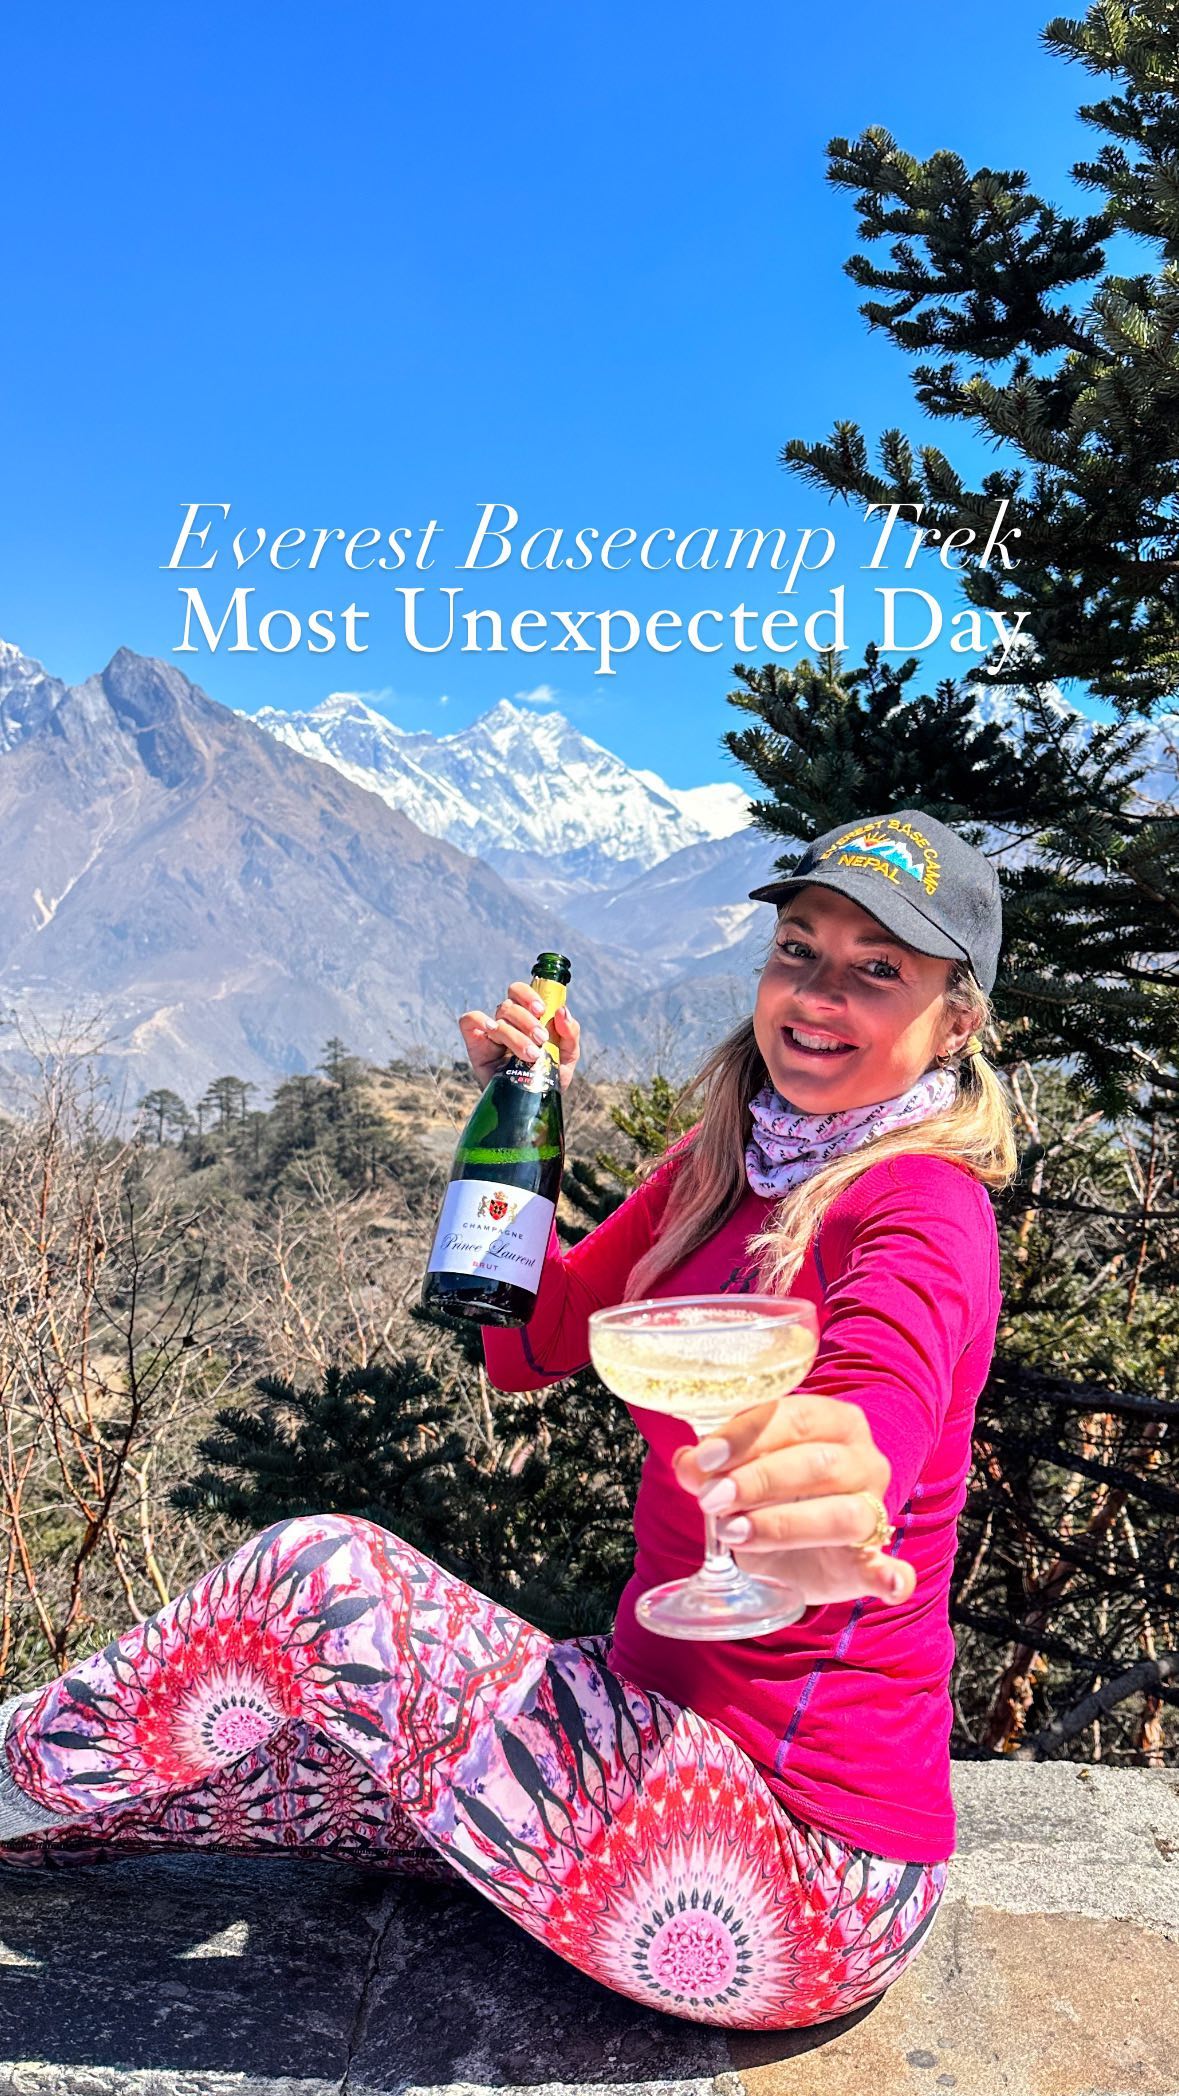 The most unexpected day of my Everest Basecamp Trek wasn’t the snow storm, or the final trek to Basecamp…it was when we did an acclimization day (where you hike super high then go back down to adjust to the altitude) to a fancy hotel that’s one of the highest in the world…and popped a bottle of champagne. 😁🥂🍾

Quick disclaimer first: we were told that you’re technically not supposed to drink at high altitudes on the way up, but since it was an acclimization day and we were going back down/sleeping at a lower altitude, our guides let it slide.

And it was freaking FABULOUS. Especially since we were slightly bitter seeing all the clean, nicely dressed people who had just taken a 5 minute helicopter up having champagne…

The best part though was it was an absolutely perfect weather day! It’s extremely rare to see the peak of Mt. Everest as there’s usually a cloud there since it’s so high, but there was nothing blocking it this day!

And fun fact: I used one of my own photos of the Everest summit from this spot as the outline of my tattoo that I got after the trek!

You can also stay at this hotel for $200/person/night, which we were really excited to do…except we happened to be there during a power outage, which would have defeated the point of staying their for their heated rooms..

Anyway, this was day 3 of 12 of my trek, and it put us all in high spirits (literally), especially considering what was yet to come.

Oh! And another fun fact! There are bars, and alcohol sold in every teahouse all the way up to basecamp (where the second highest hotel in the world is but it’s more like hellish)! It was slightly strange to see, but we definitely started having beers on the way down!

Did you expect to see this on the Everest Basecamp trek??

#ebc #everestbasecamp #ebctrek #mylifesatravelmovie #womenwhohike #nepal #bucketlist